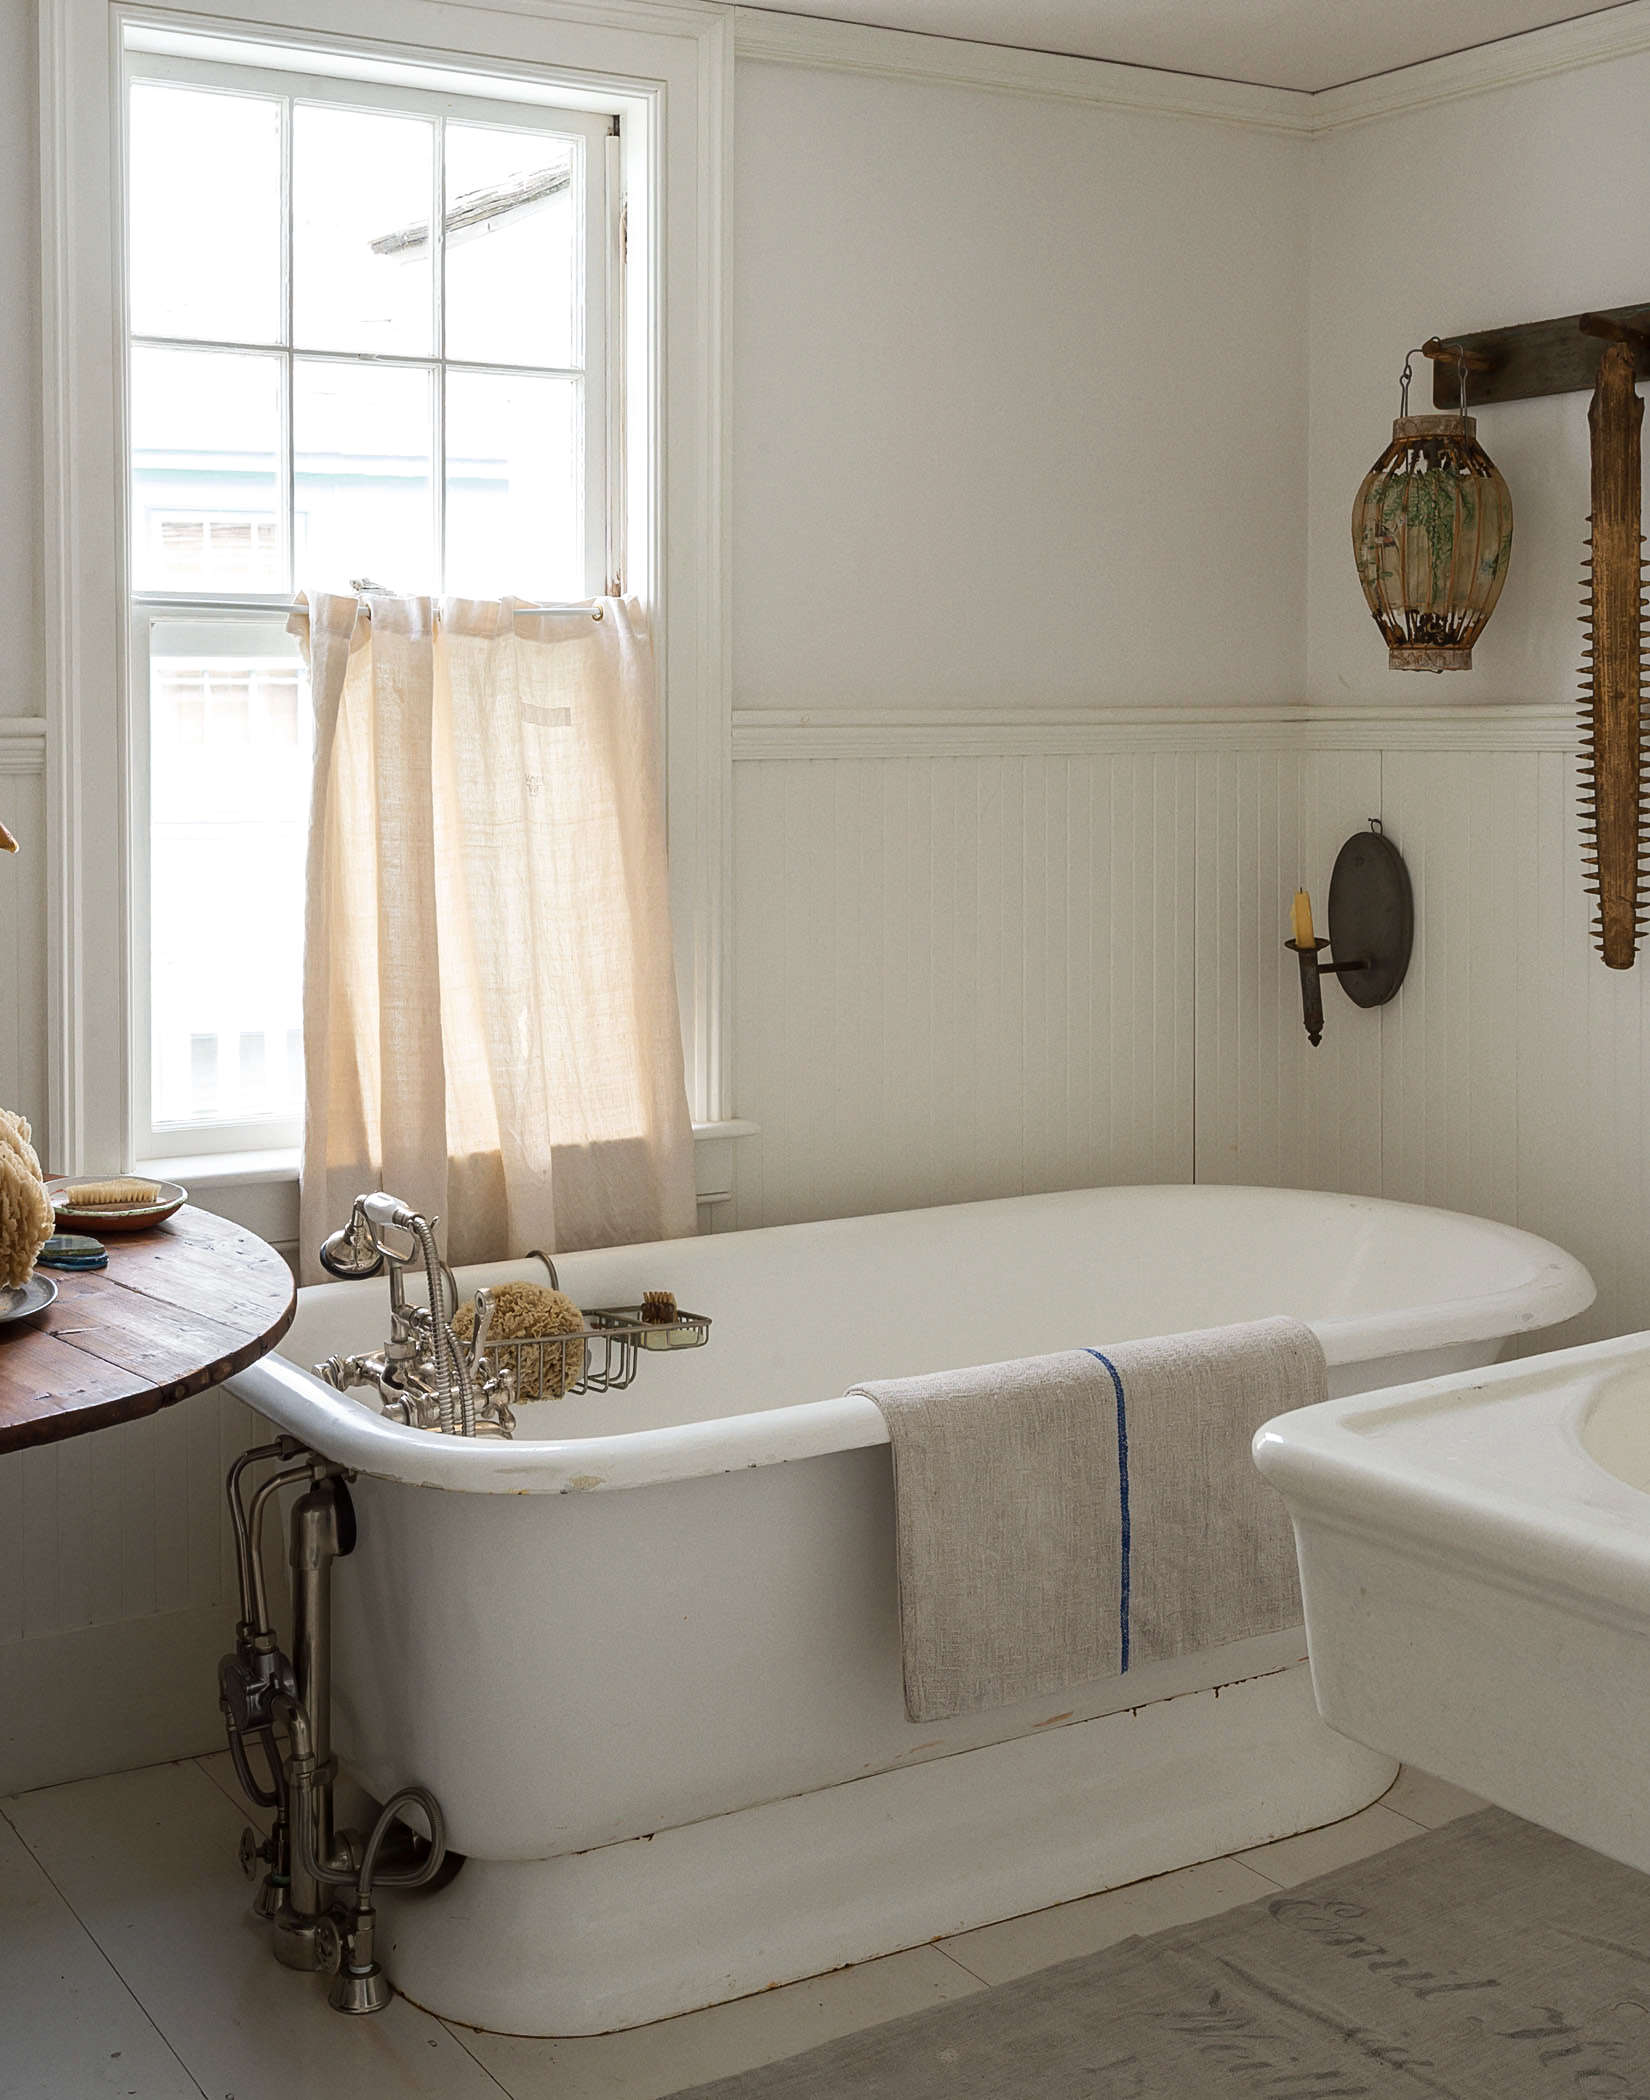 Bathroom of the Week: John Derian’s Homage to Old Cape Cod